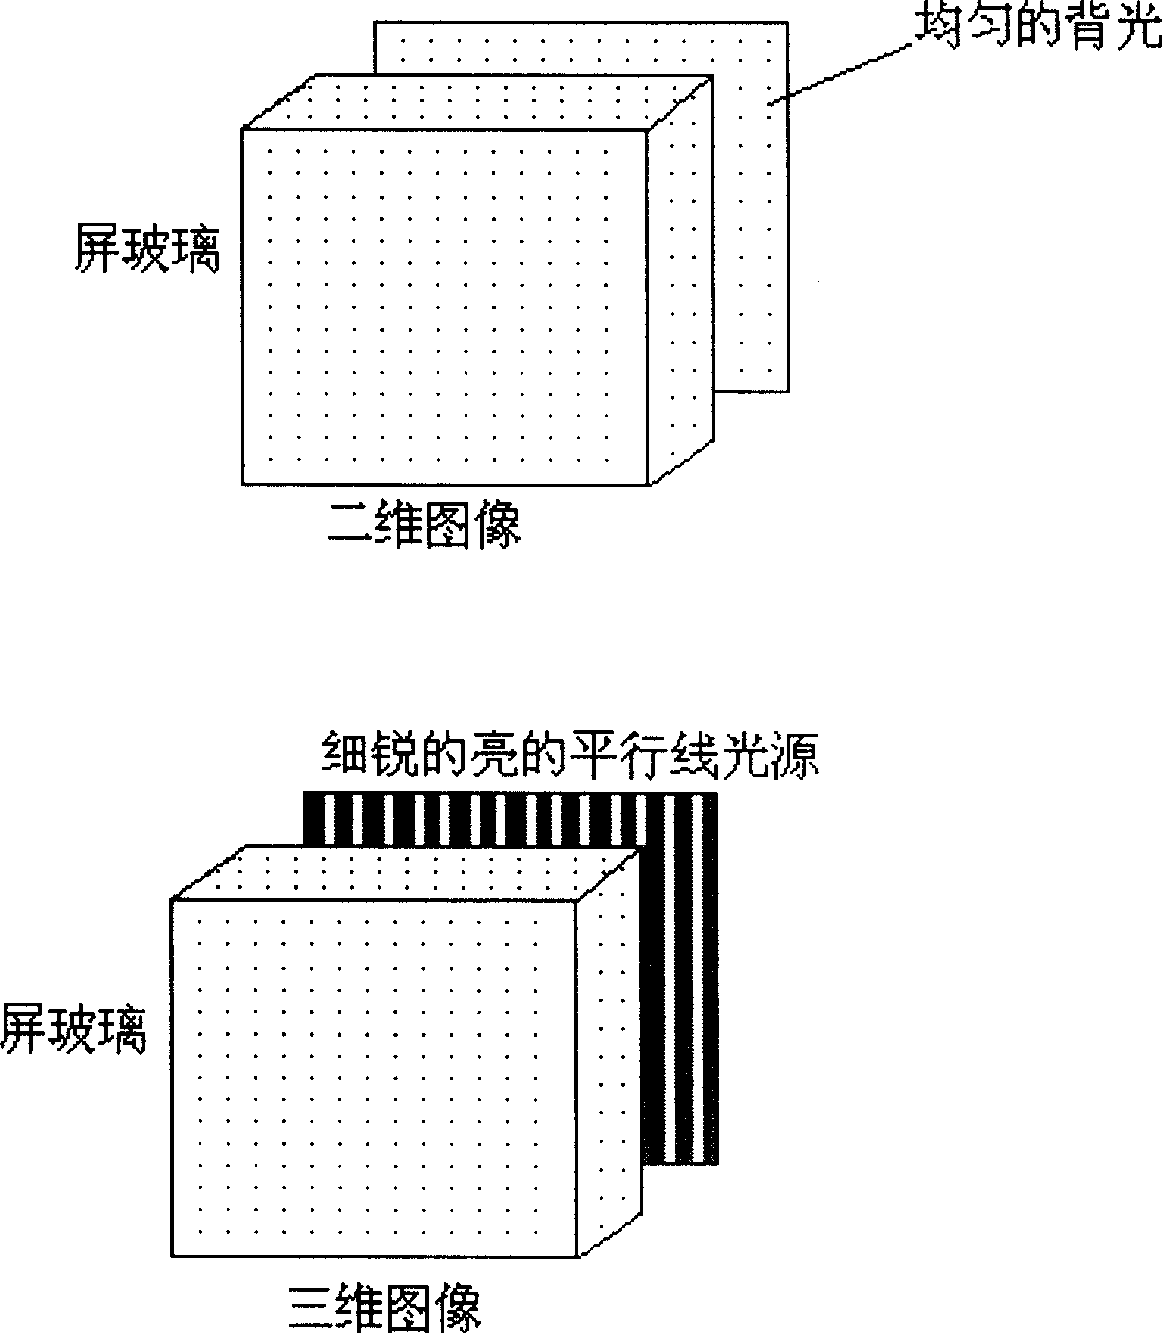 2-D/pseudo-3-D display technology capable of switching over using low-density grating polaroid or plastic lens